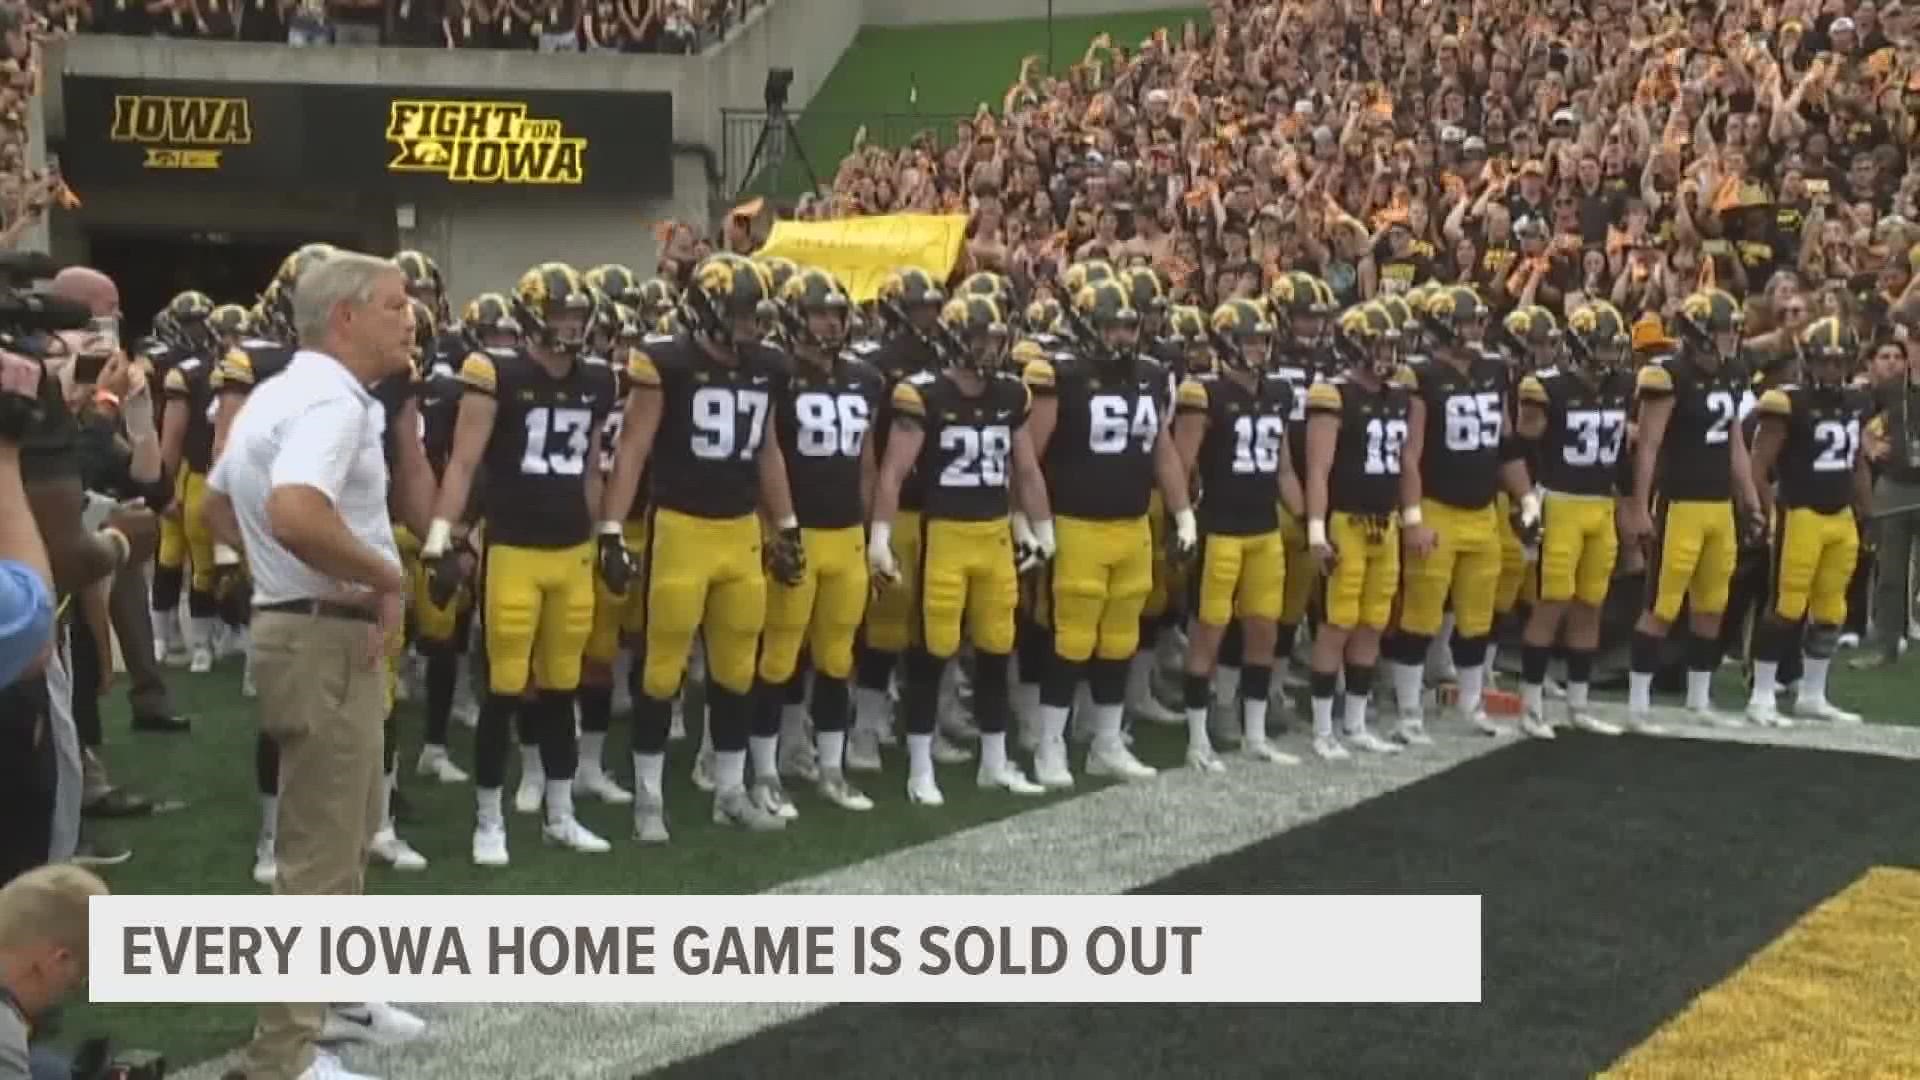 Additionally, the University of Iowa has sold 5,000 more season tickets this year.